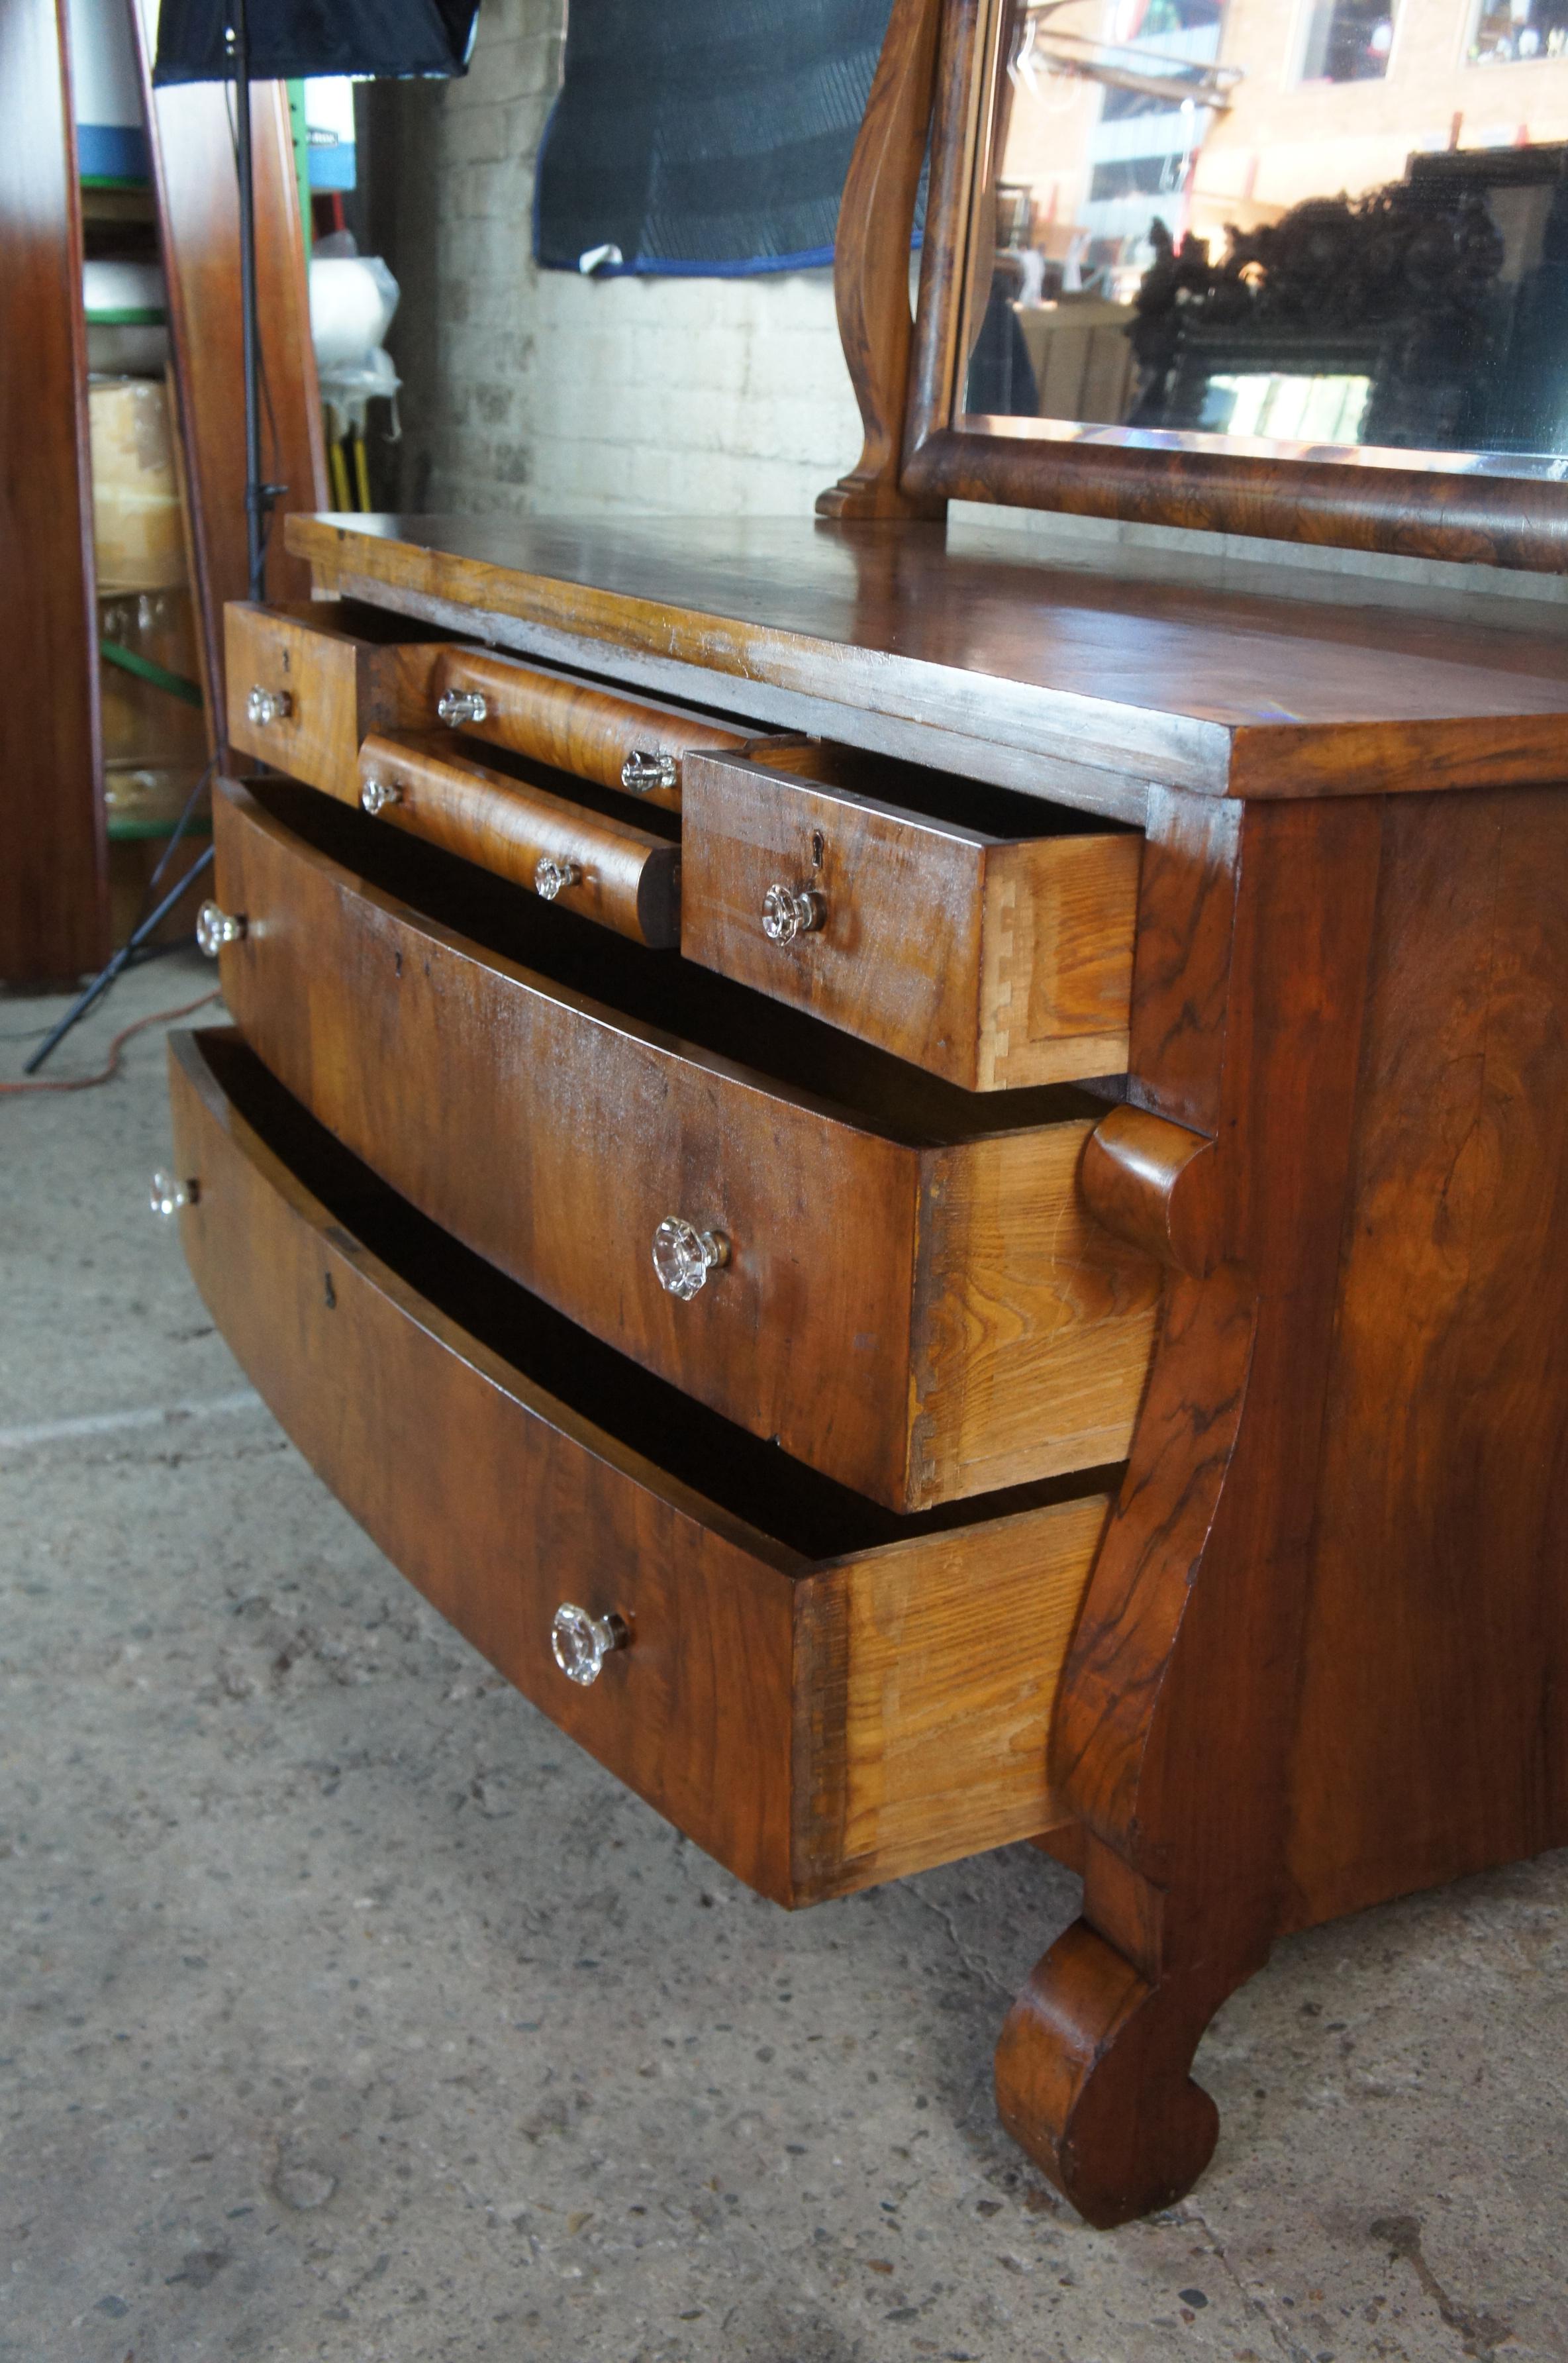 19th Century Antique American Empire Crotch Walnut Vanity Dresser Mirrored Chest of Drawers